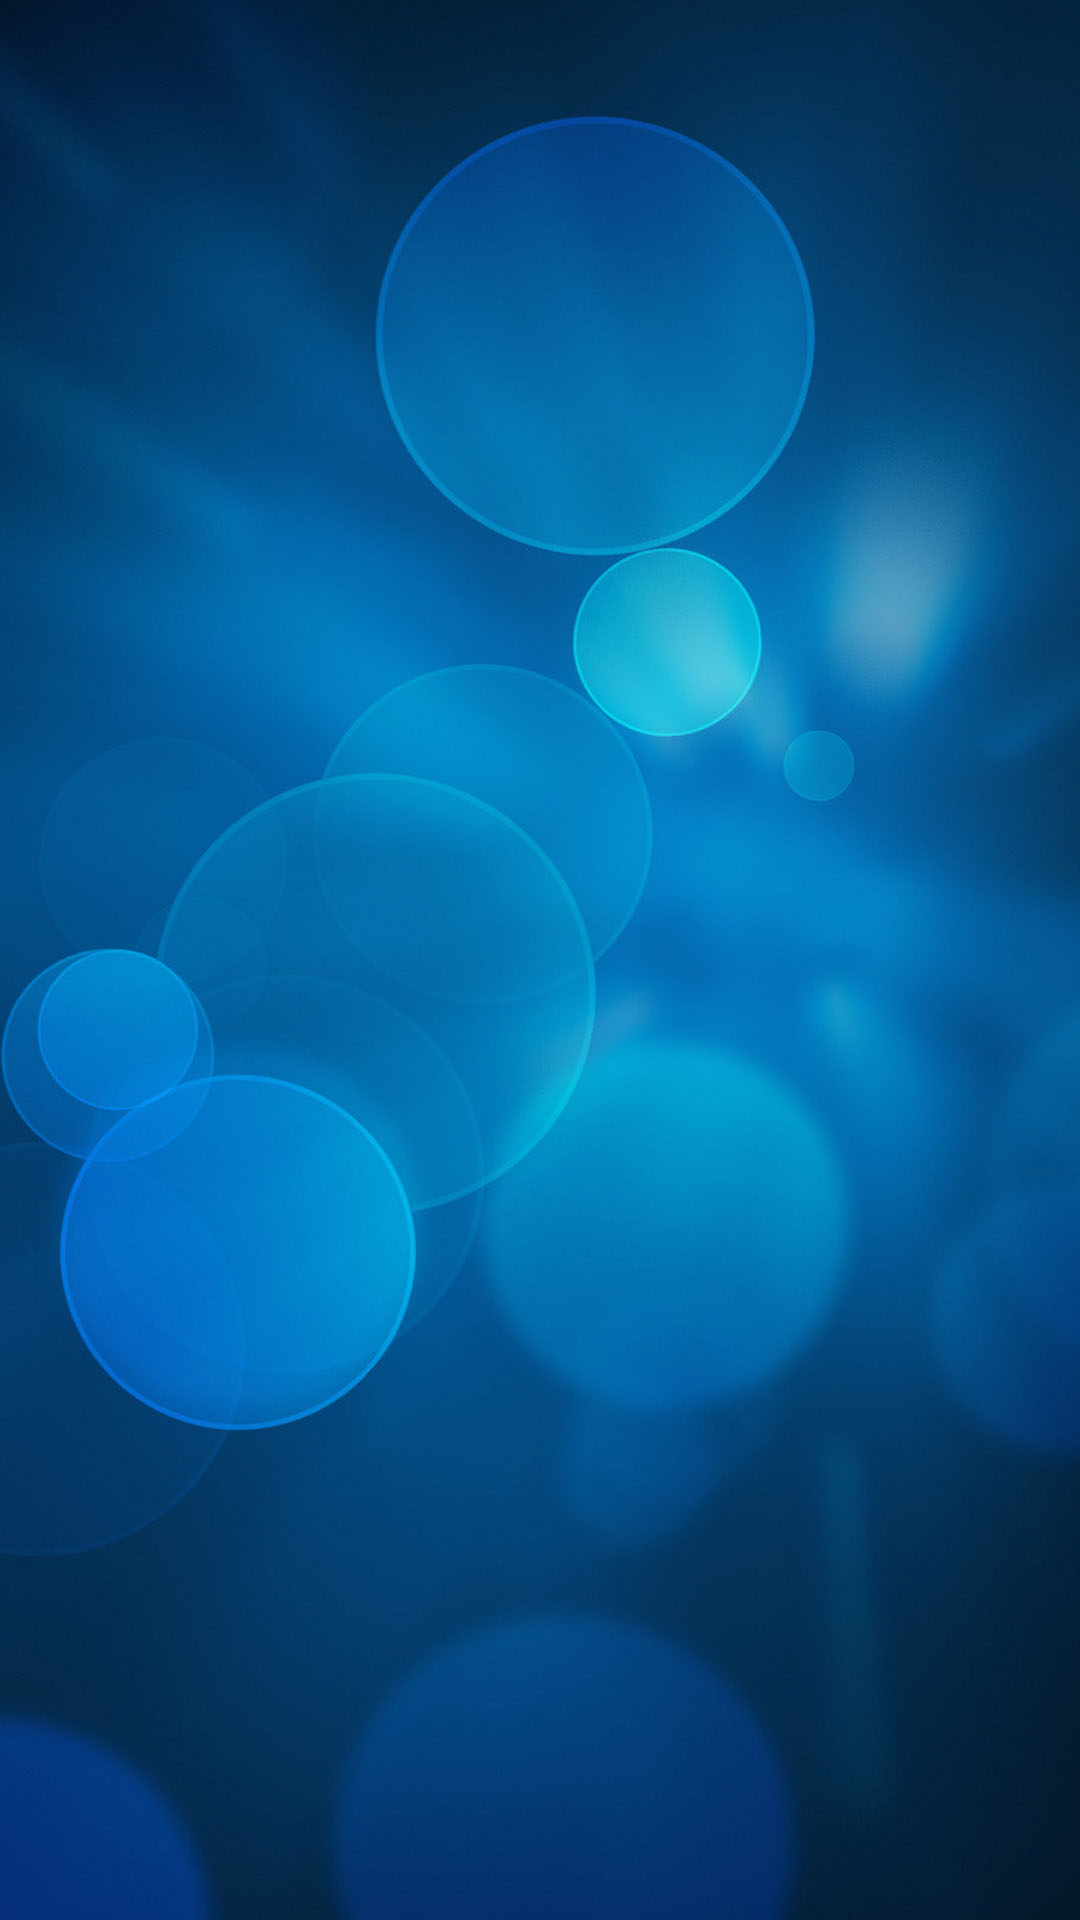 download wallpaper for android phone,blue,aqua,turquoise,azure,electric blue